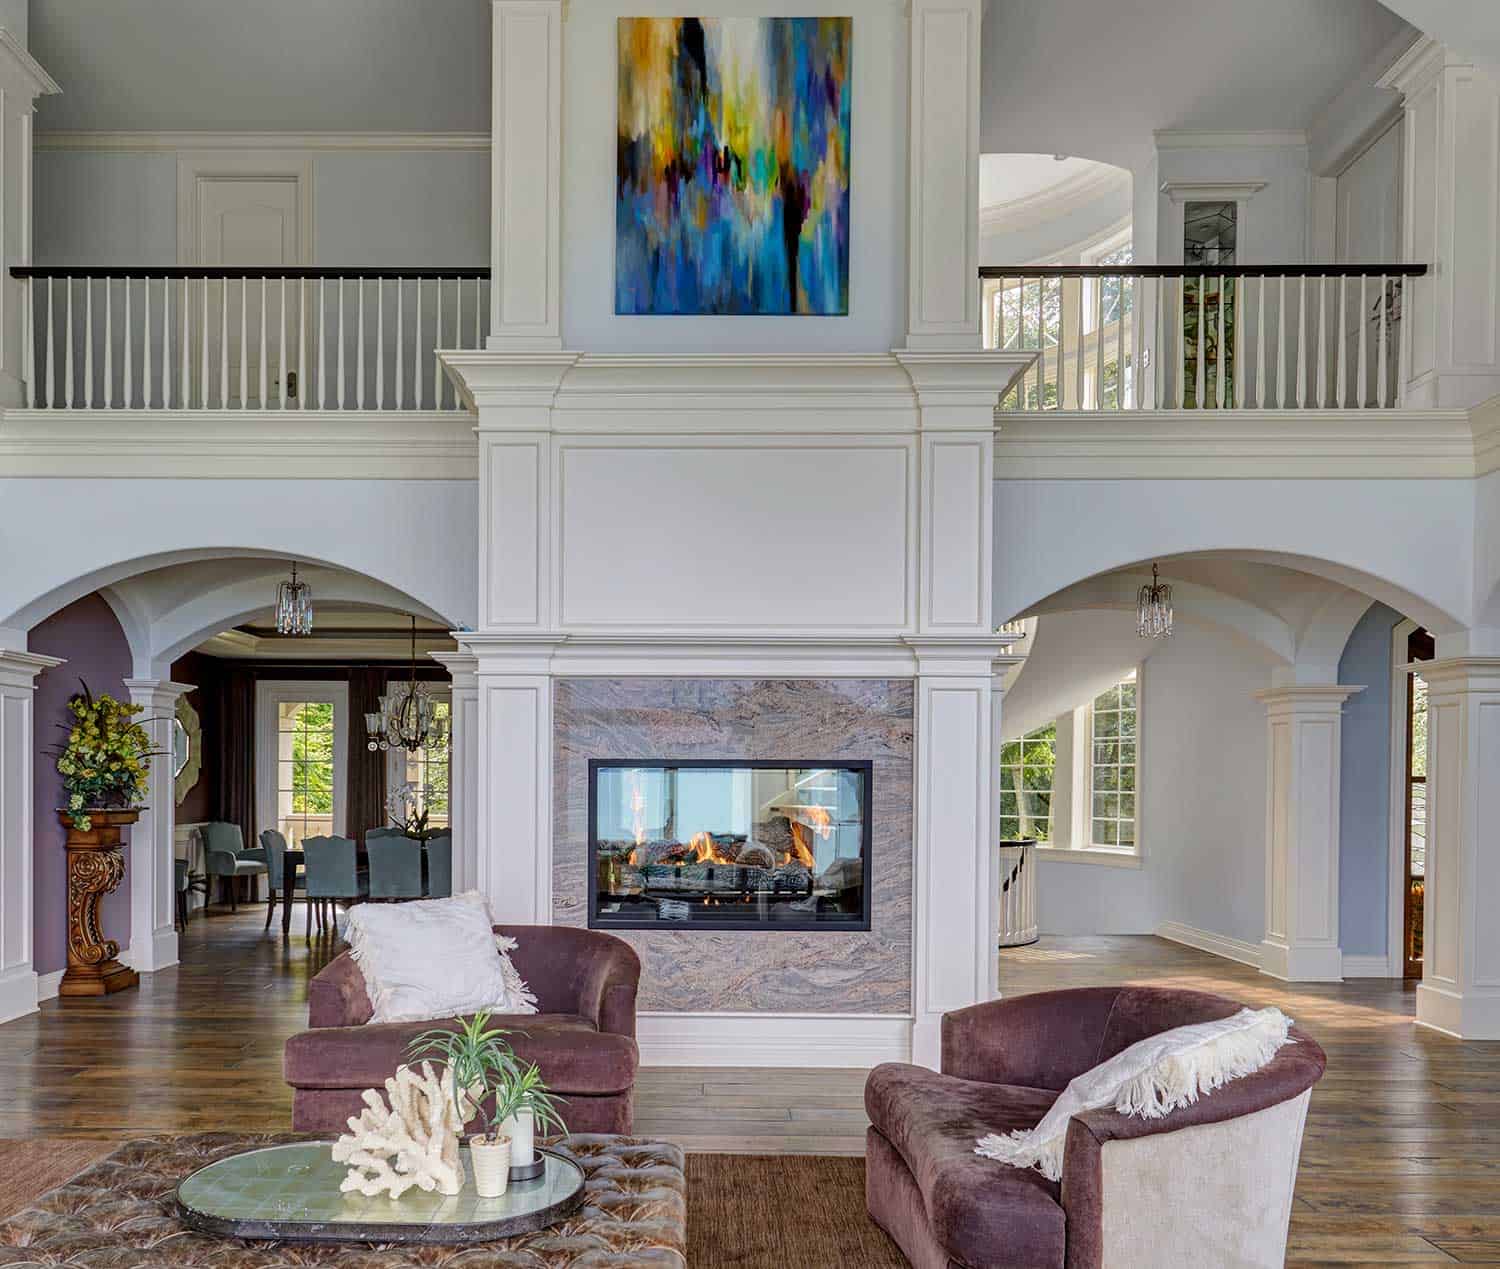 symmetrical-arched-openings-central-fireplace